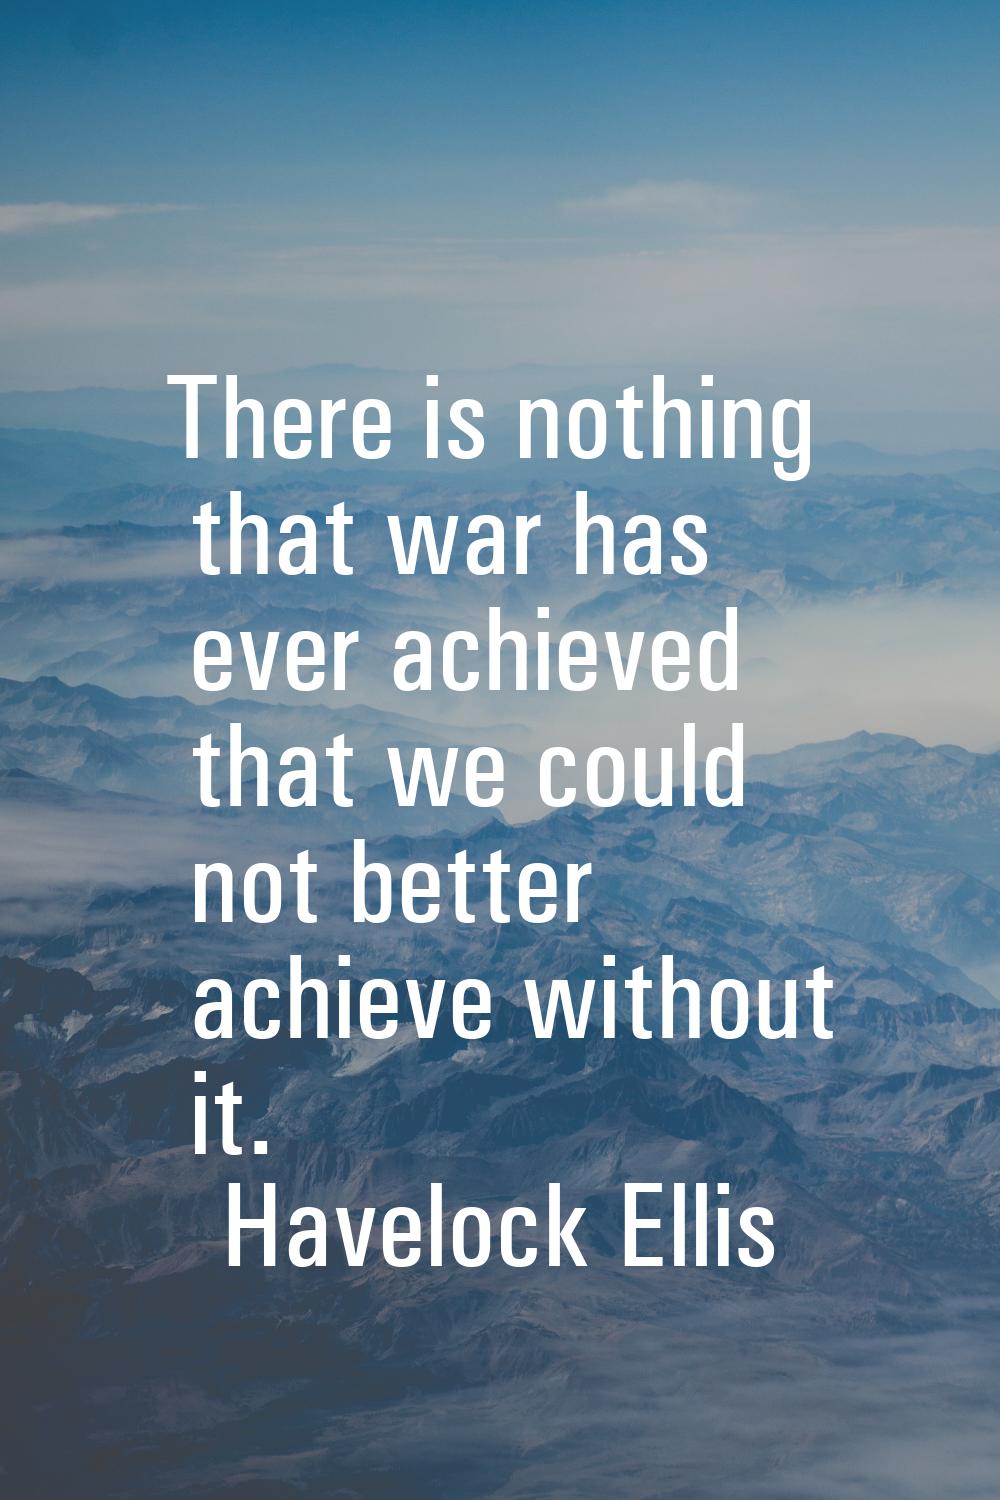 There is nothing that war has ever achieved that we could not better achieve without it.